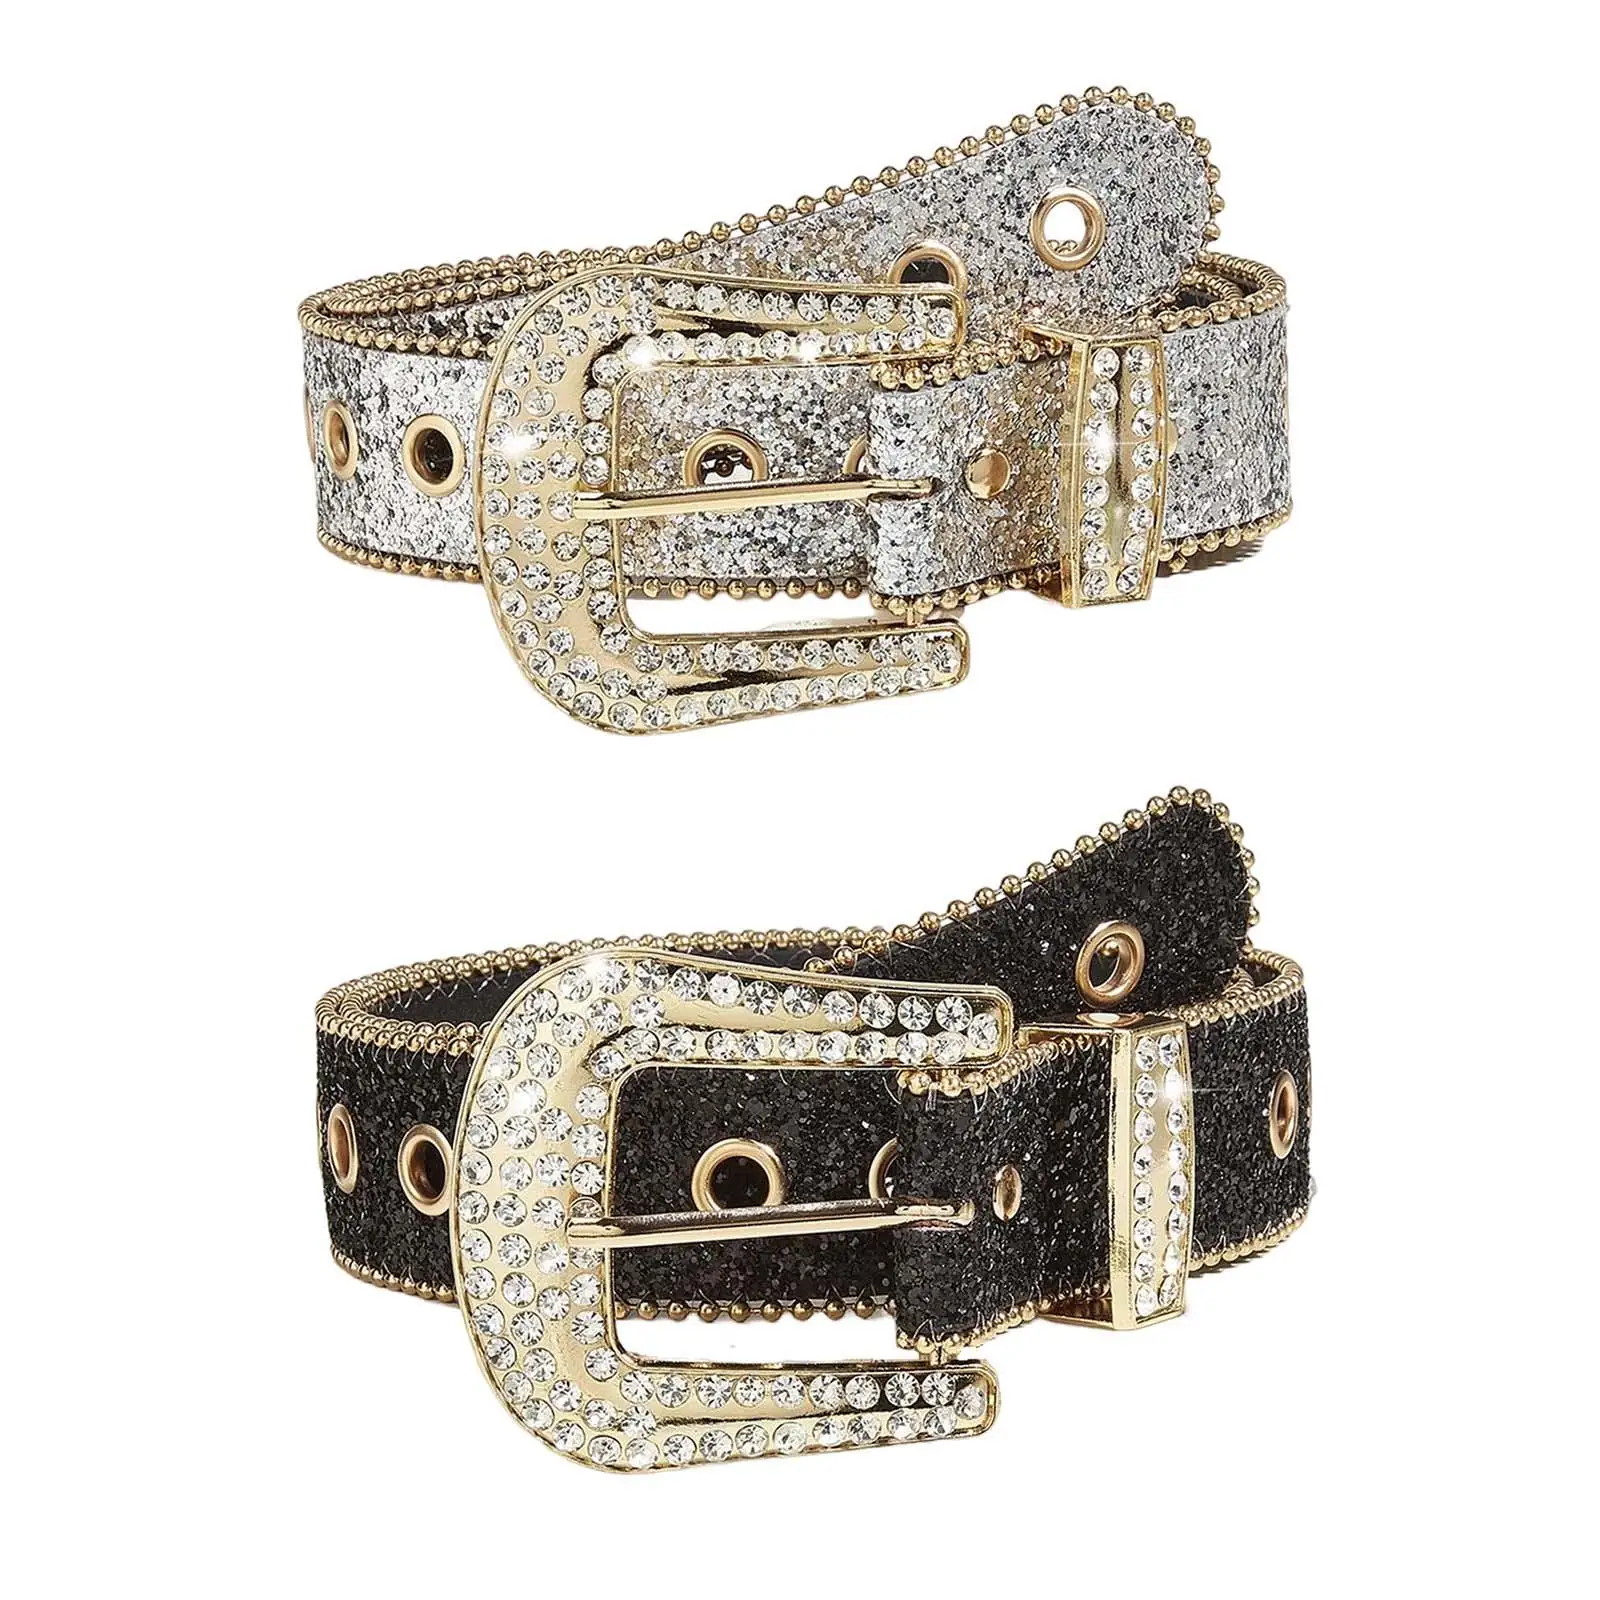 41inch Length Women PU Leather Waist Belt Eyelet Belt Metal Prong Buckle Casual Pin Buckle Waist Band for Anniversary Gift Party